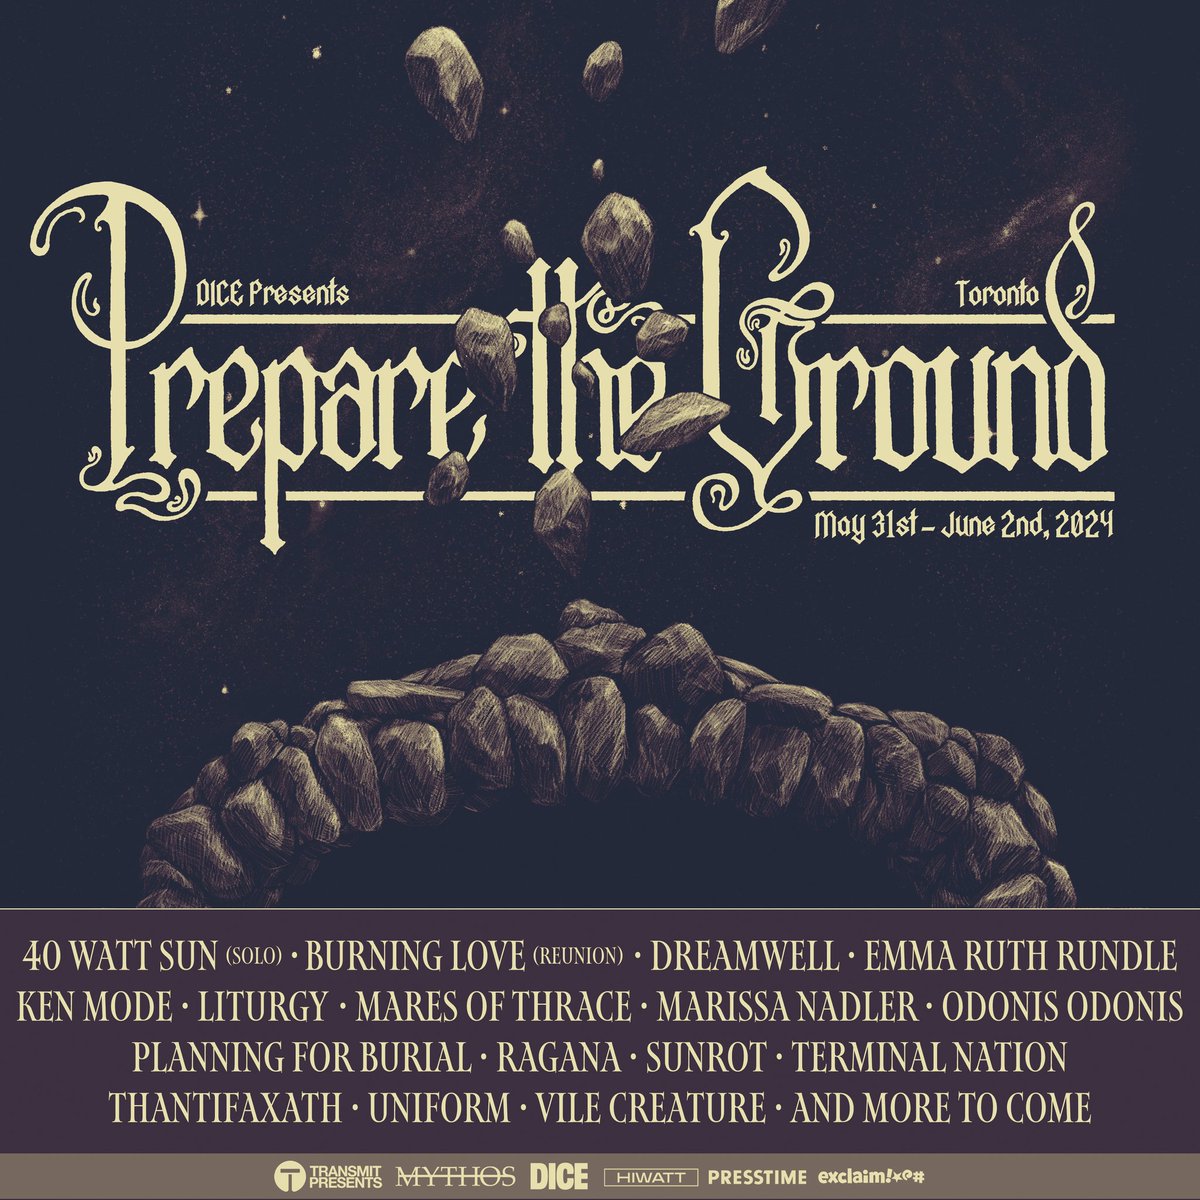 We are thrilled to announce the 1st annual Prepare the Ground arts & heavy music festival taking place 5/31-6/2 2024 in Toronto. Early bird tickets are on sale now for $128CAD (all fees/taxes included). Find lineup & ticket info at preparetheground.com